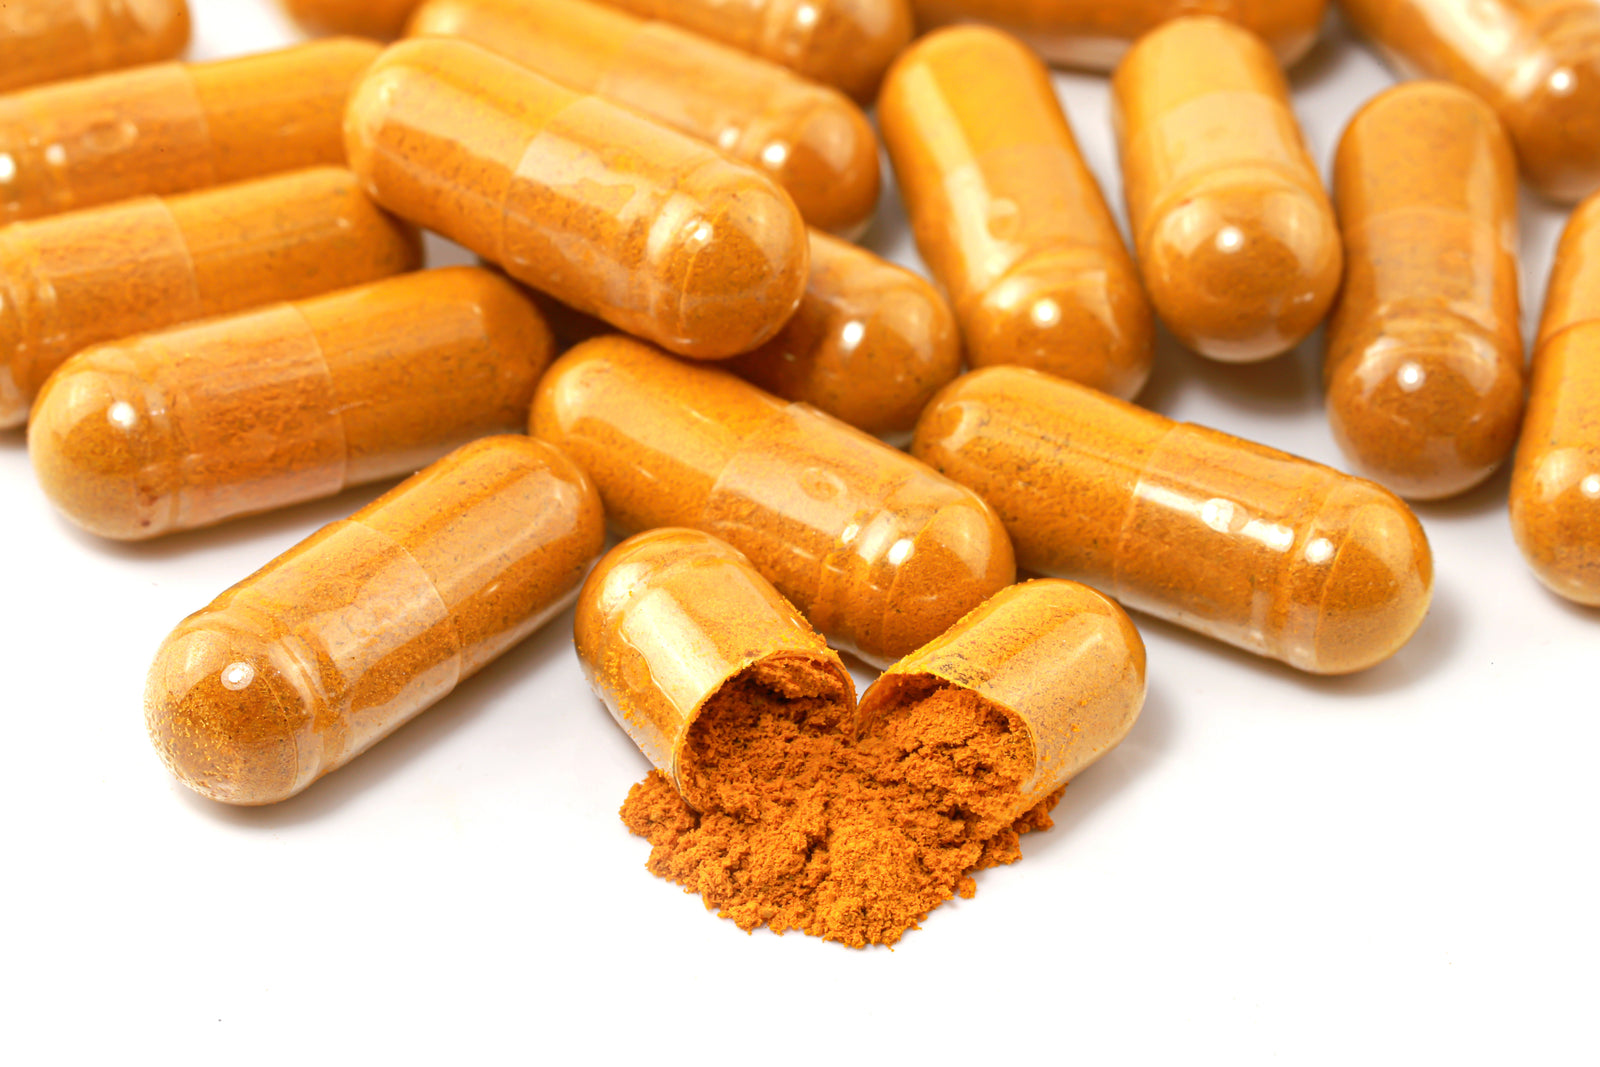 How to Take Turmeric for Inflammation